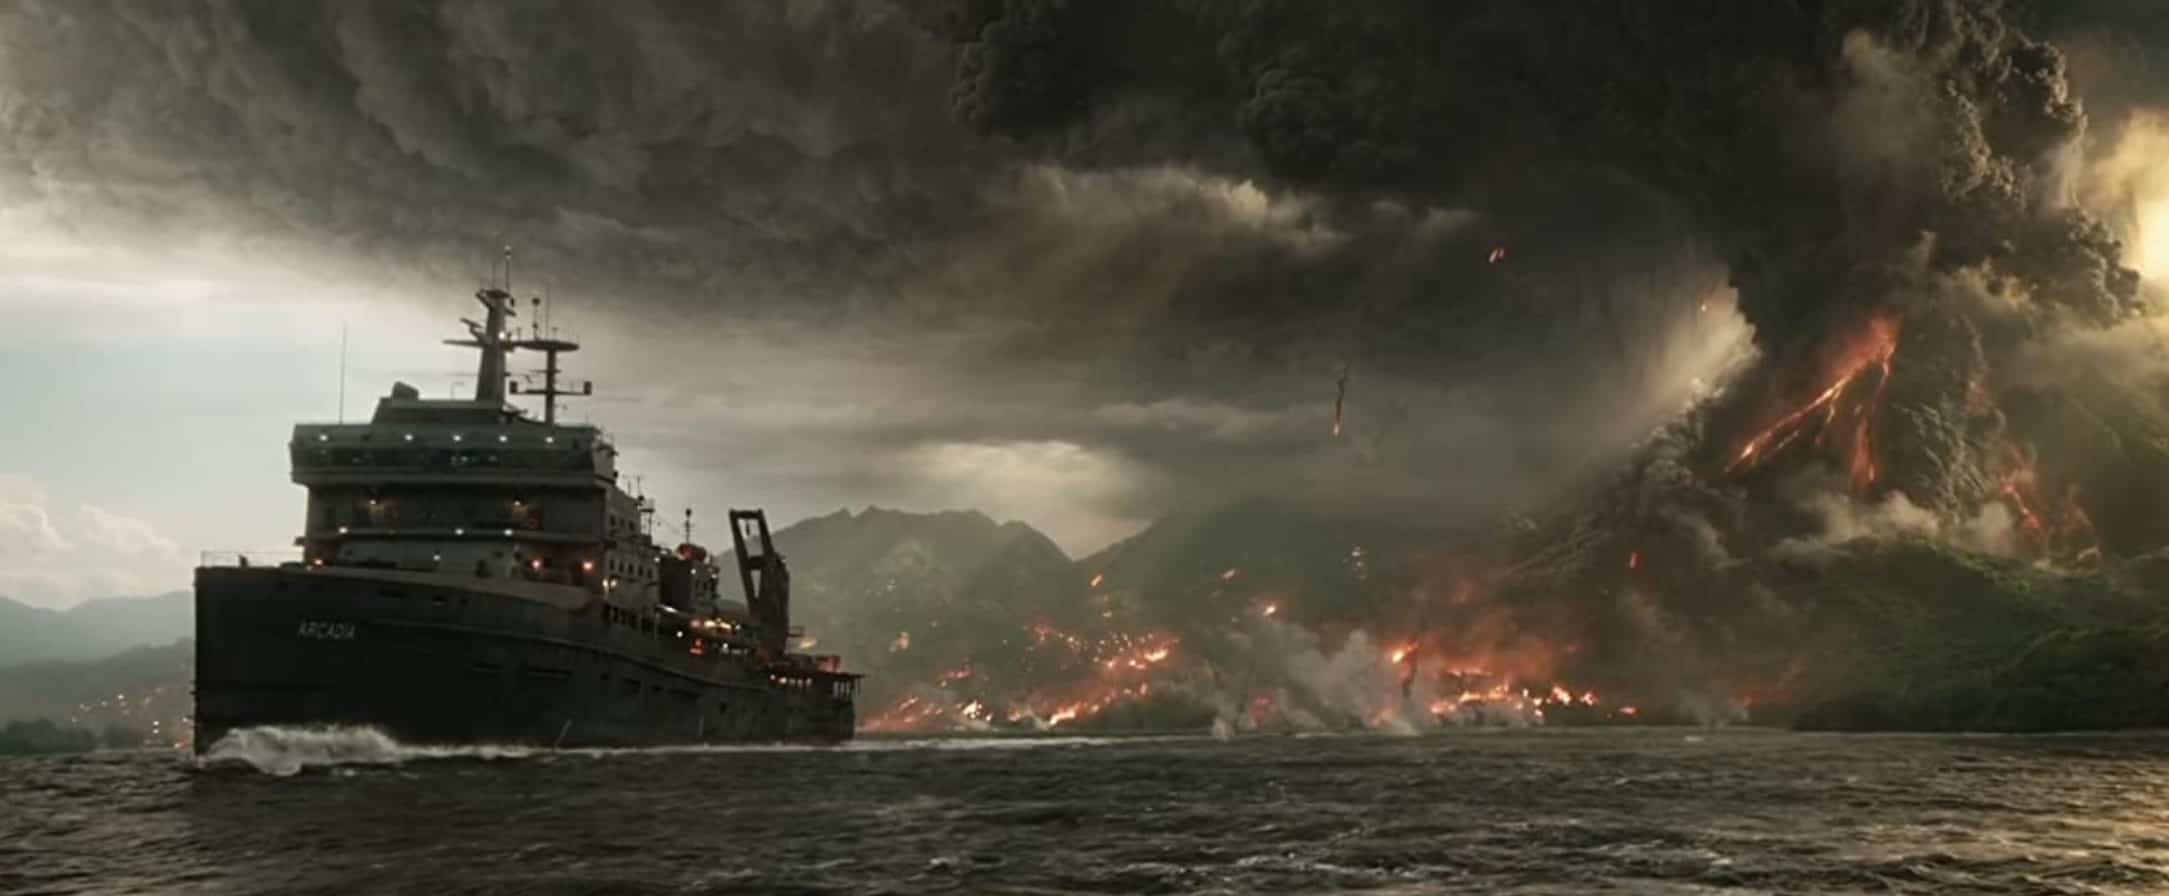 A ship sails away from a burning island in this image from fuboTV